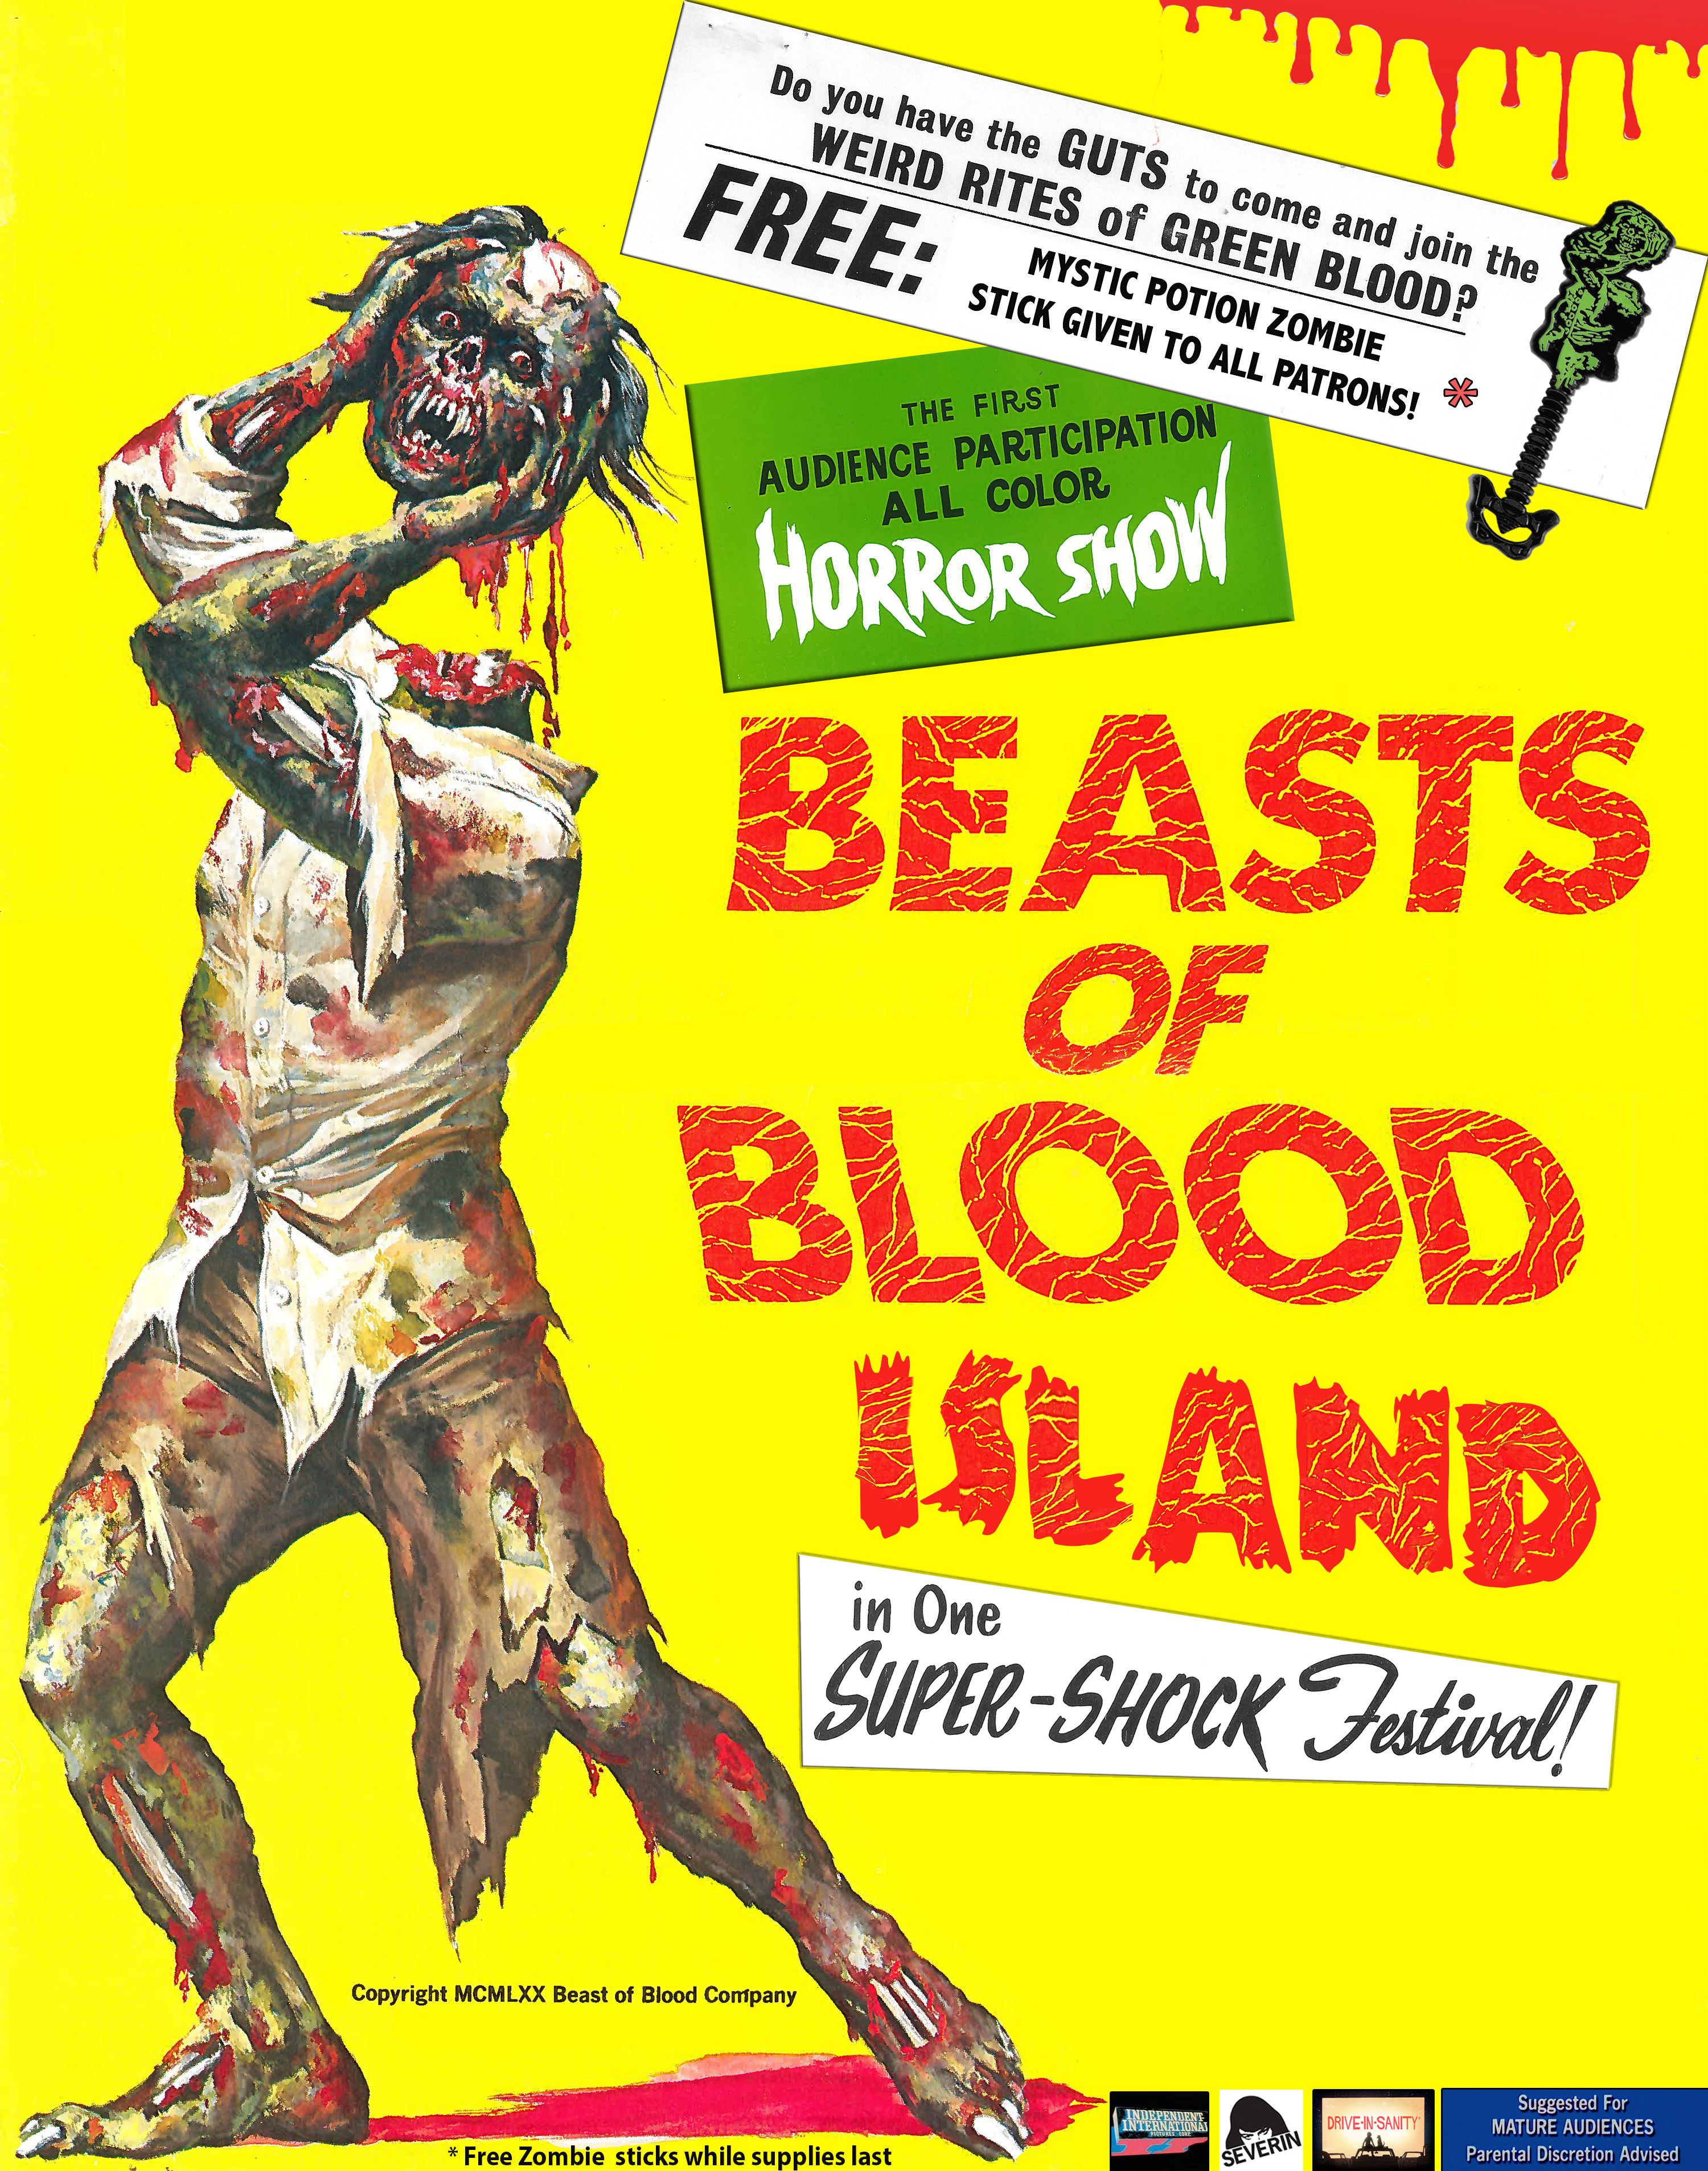 The Beasts of Blood Island